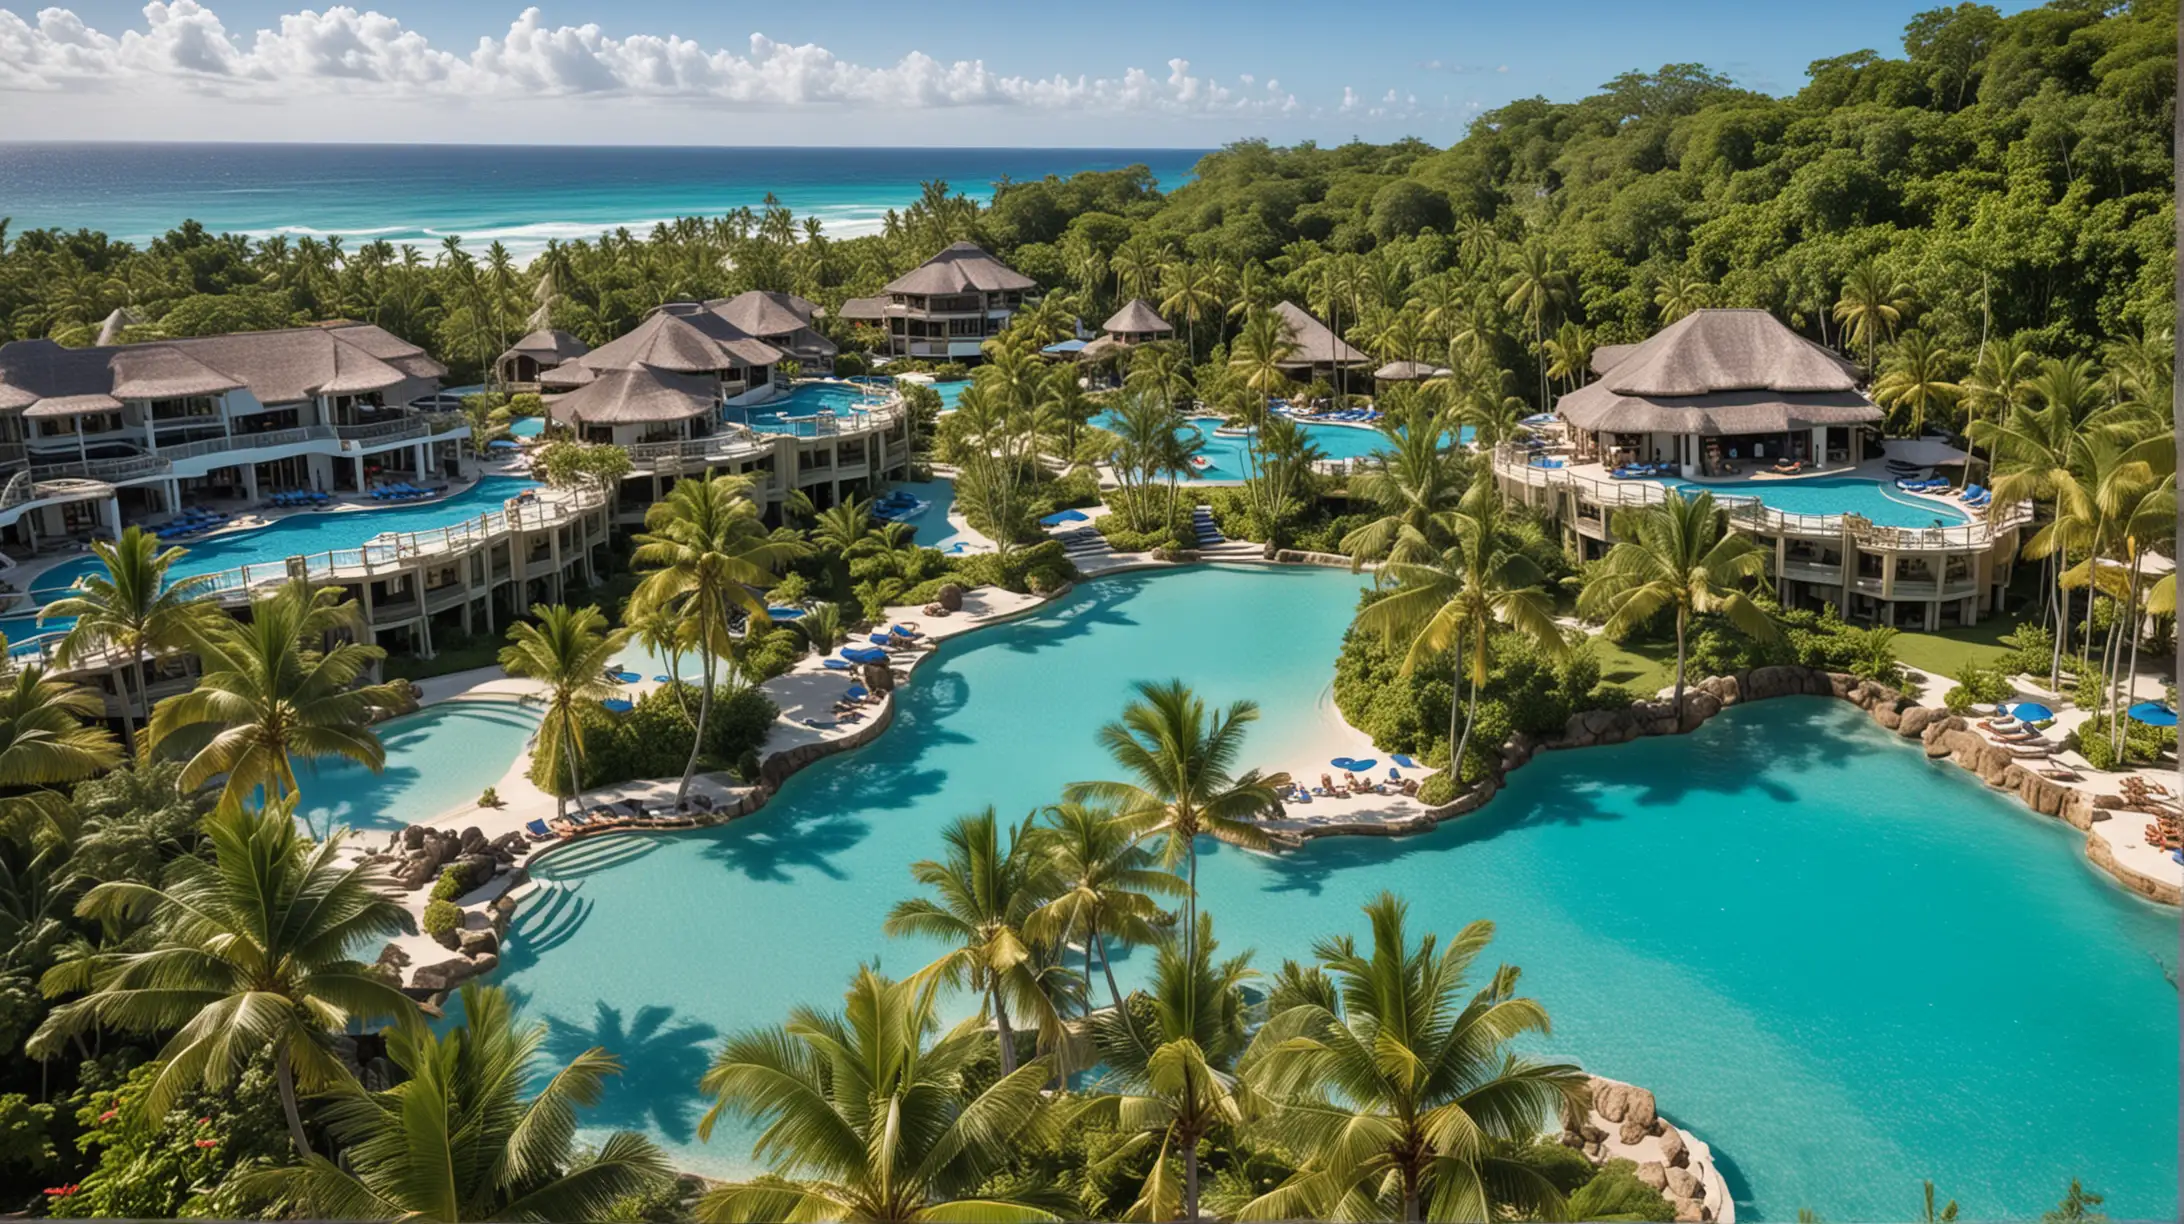 Luxurious Tropical Vacation Resort with Blue Waters and Beachside Relaxation